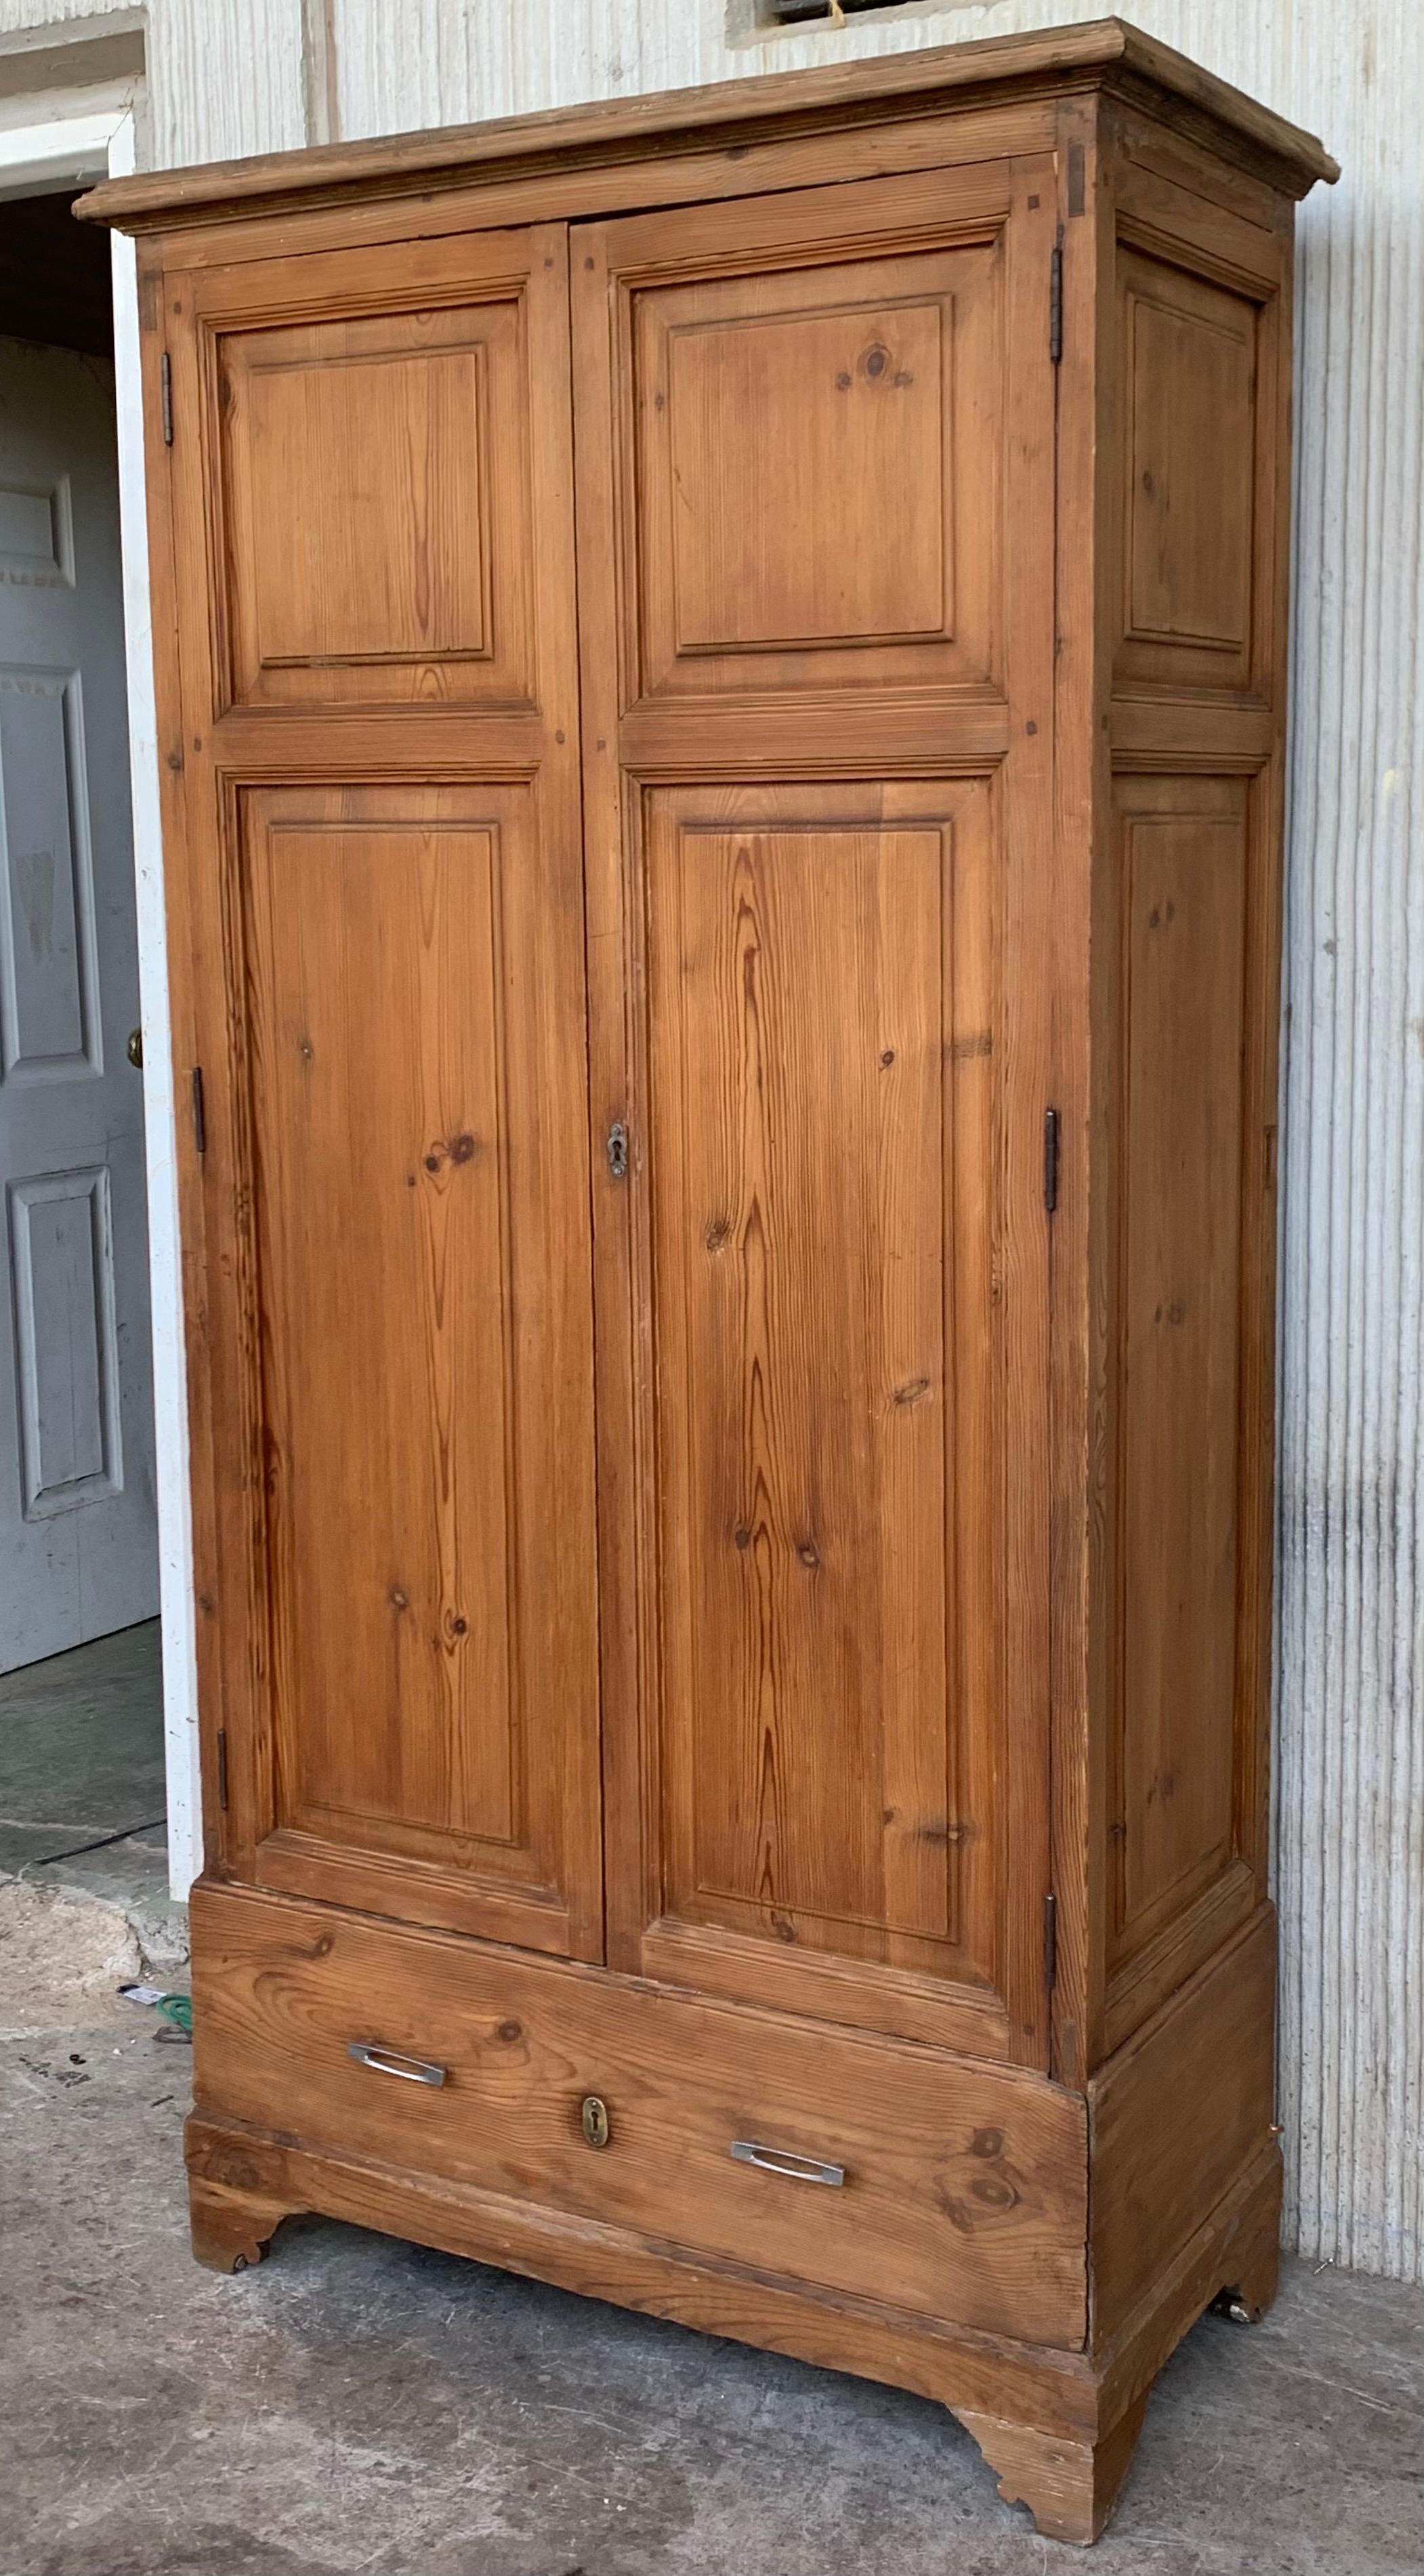 Pine narrow 20th century Spanish cabinet constructed from pine. Features a coffered case fronted by two doors in the high part and one drawer in the low part. This massive cabinet made in Spain features beautiful pine grain and showcases the amazing